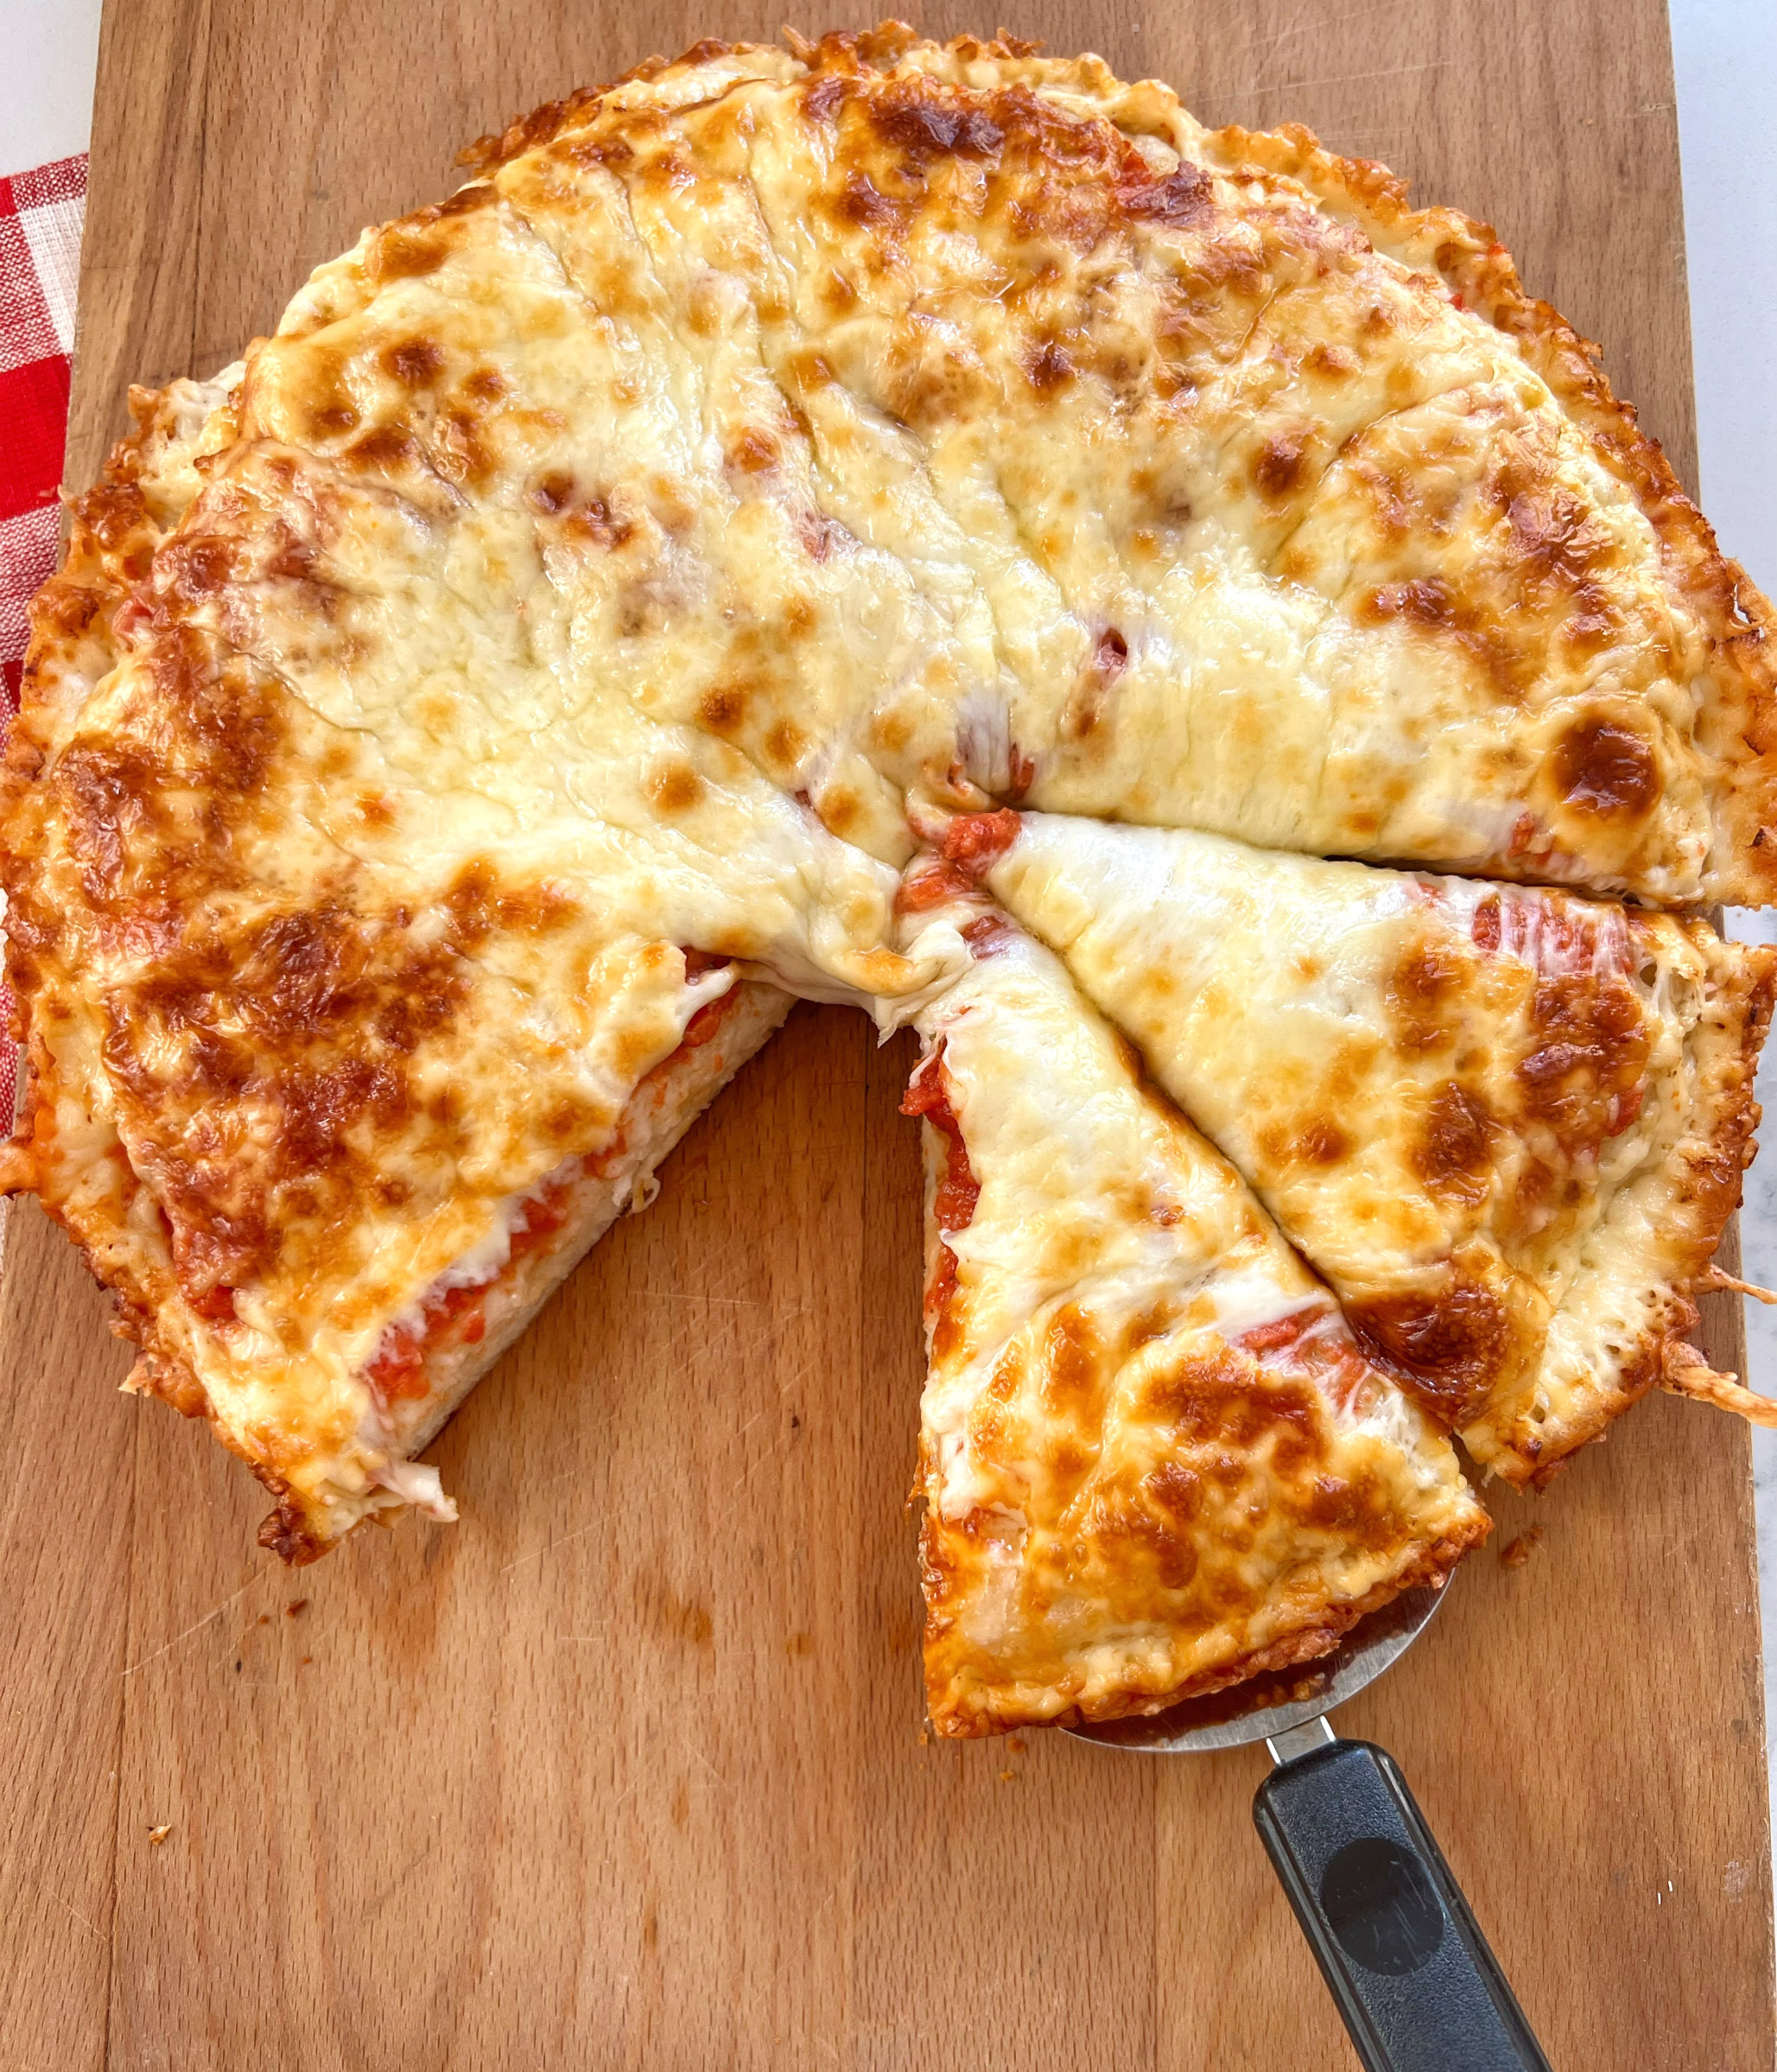 Cast Iron Pan Pizza - Sip and Feast